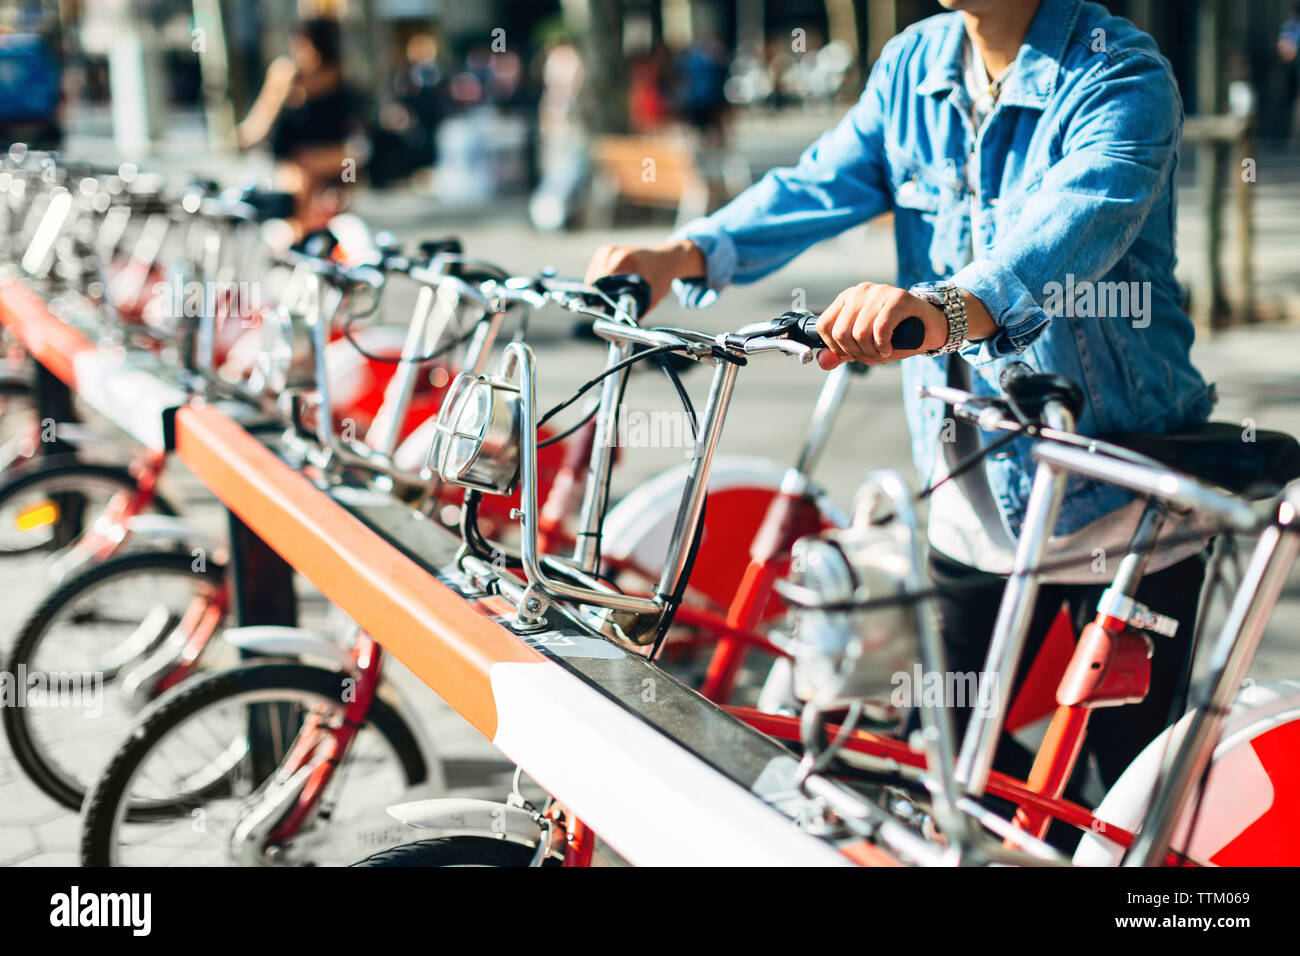 Midsection of man renting bicycle on street Stock Photo